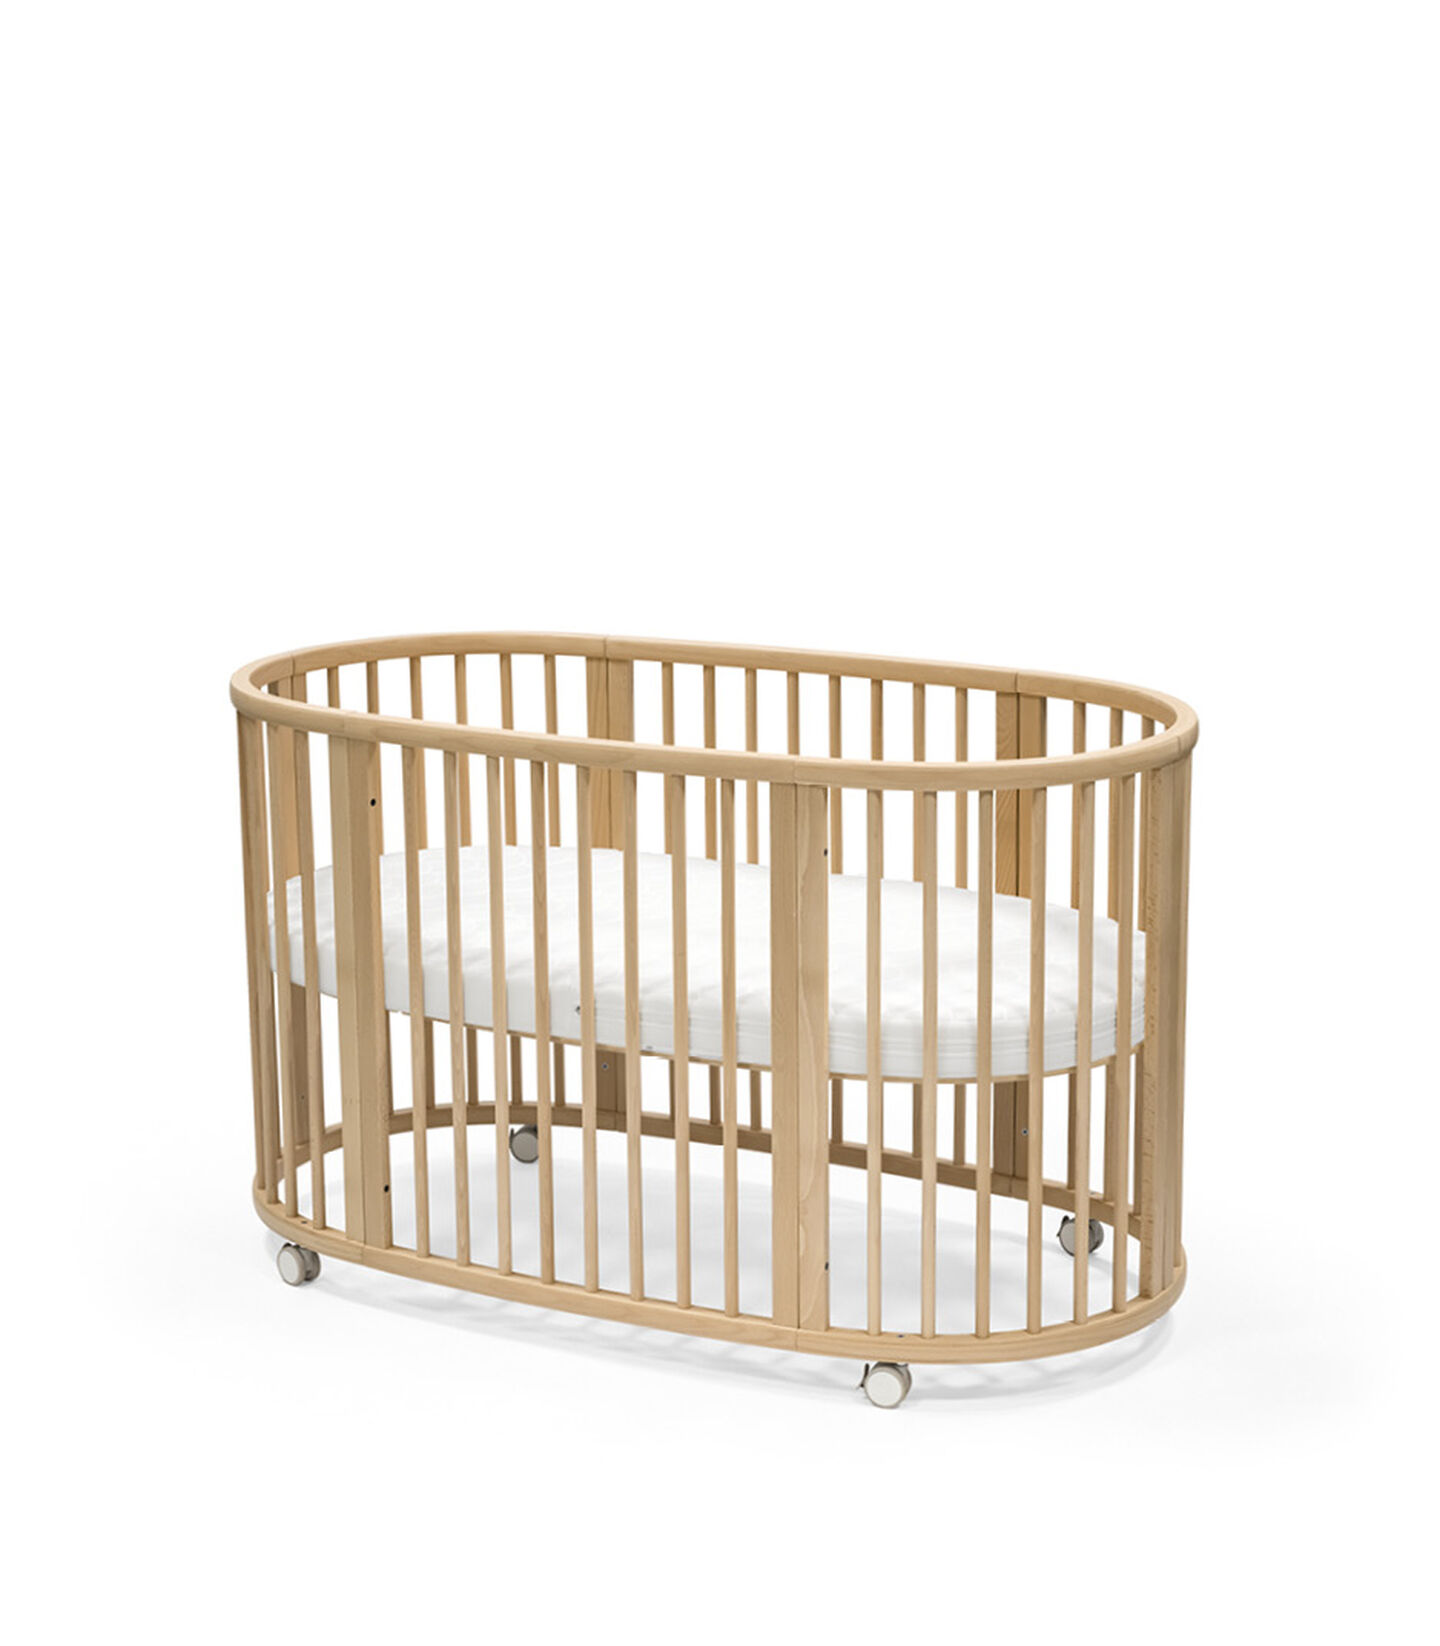 Stokke® Sleepi™ Bed, Natural. With Mattress. Closed. view 2